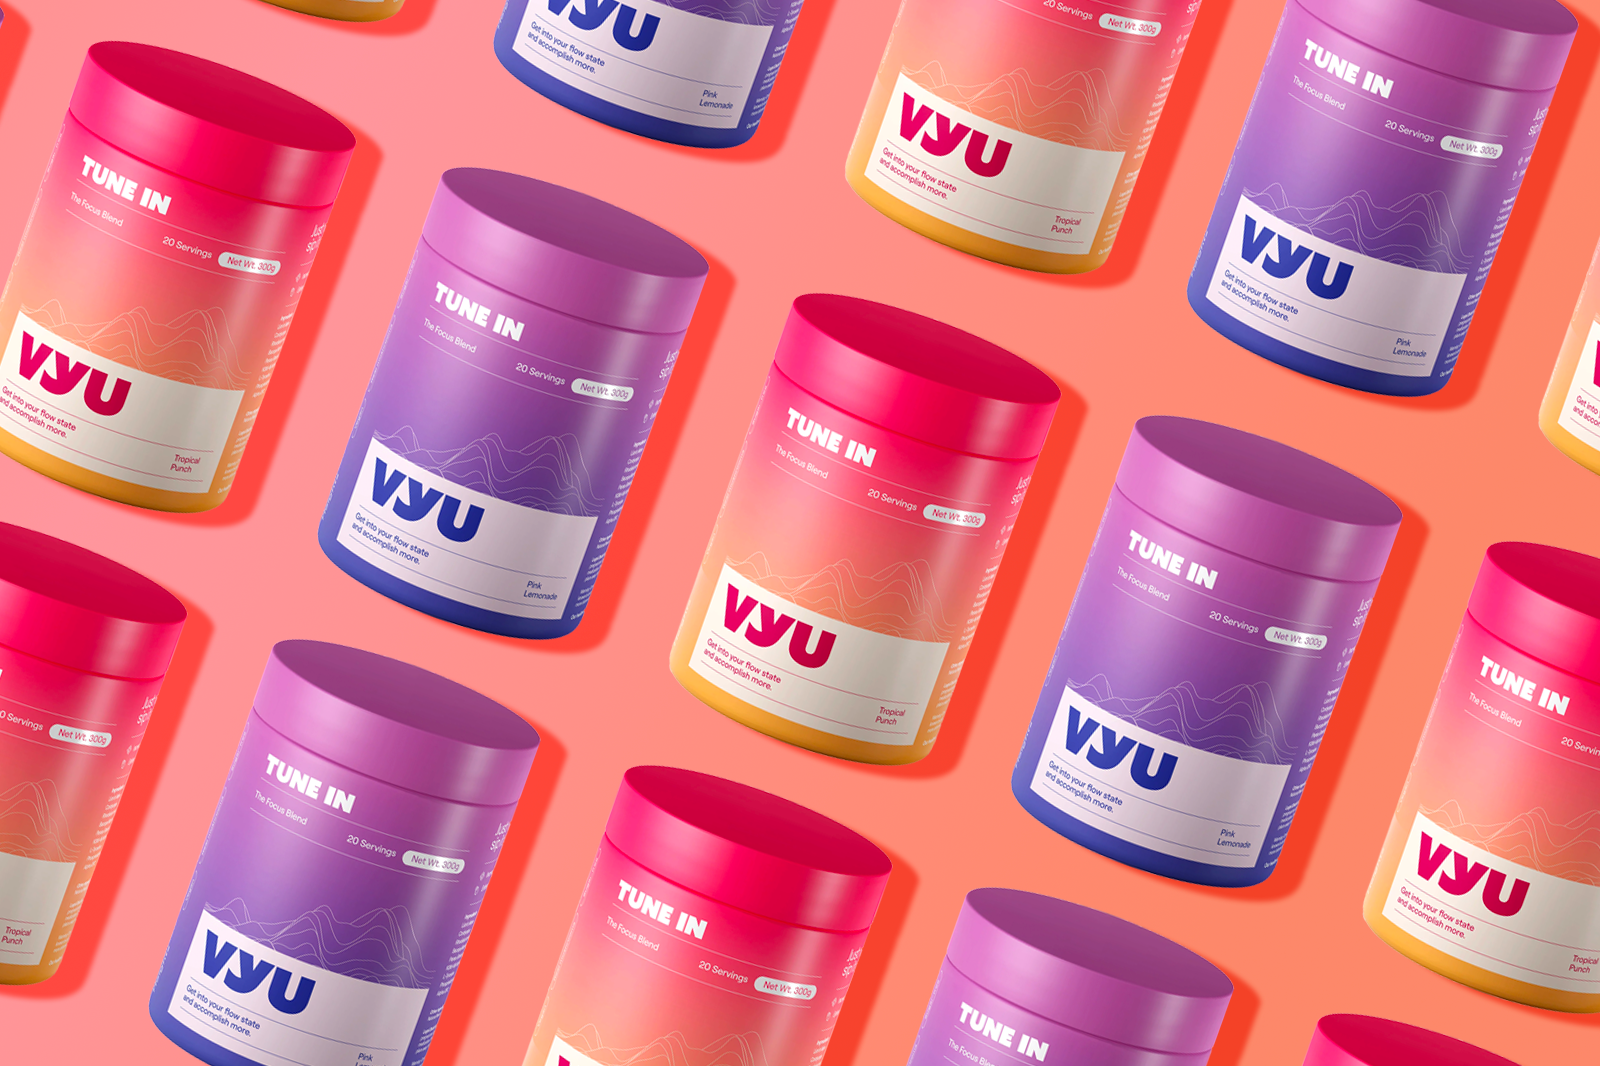 Multiple VYU TUNE IN 300g containers featuring Pink Lemonade and Tropical Punch flavors, set against a peach-colored background